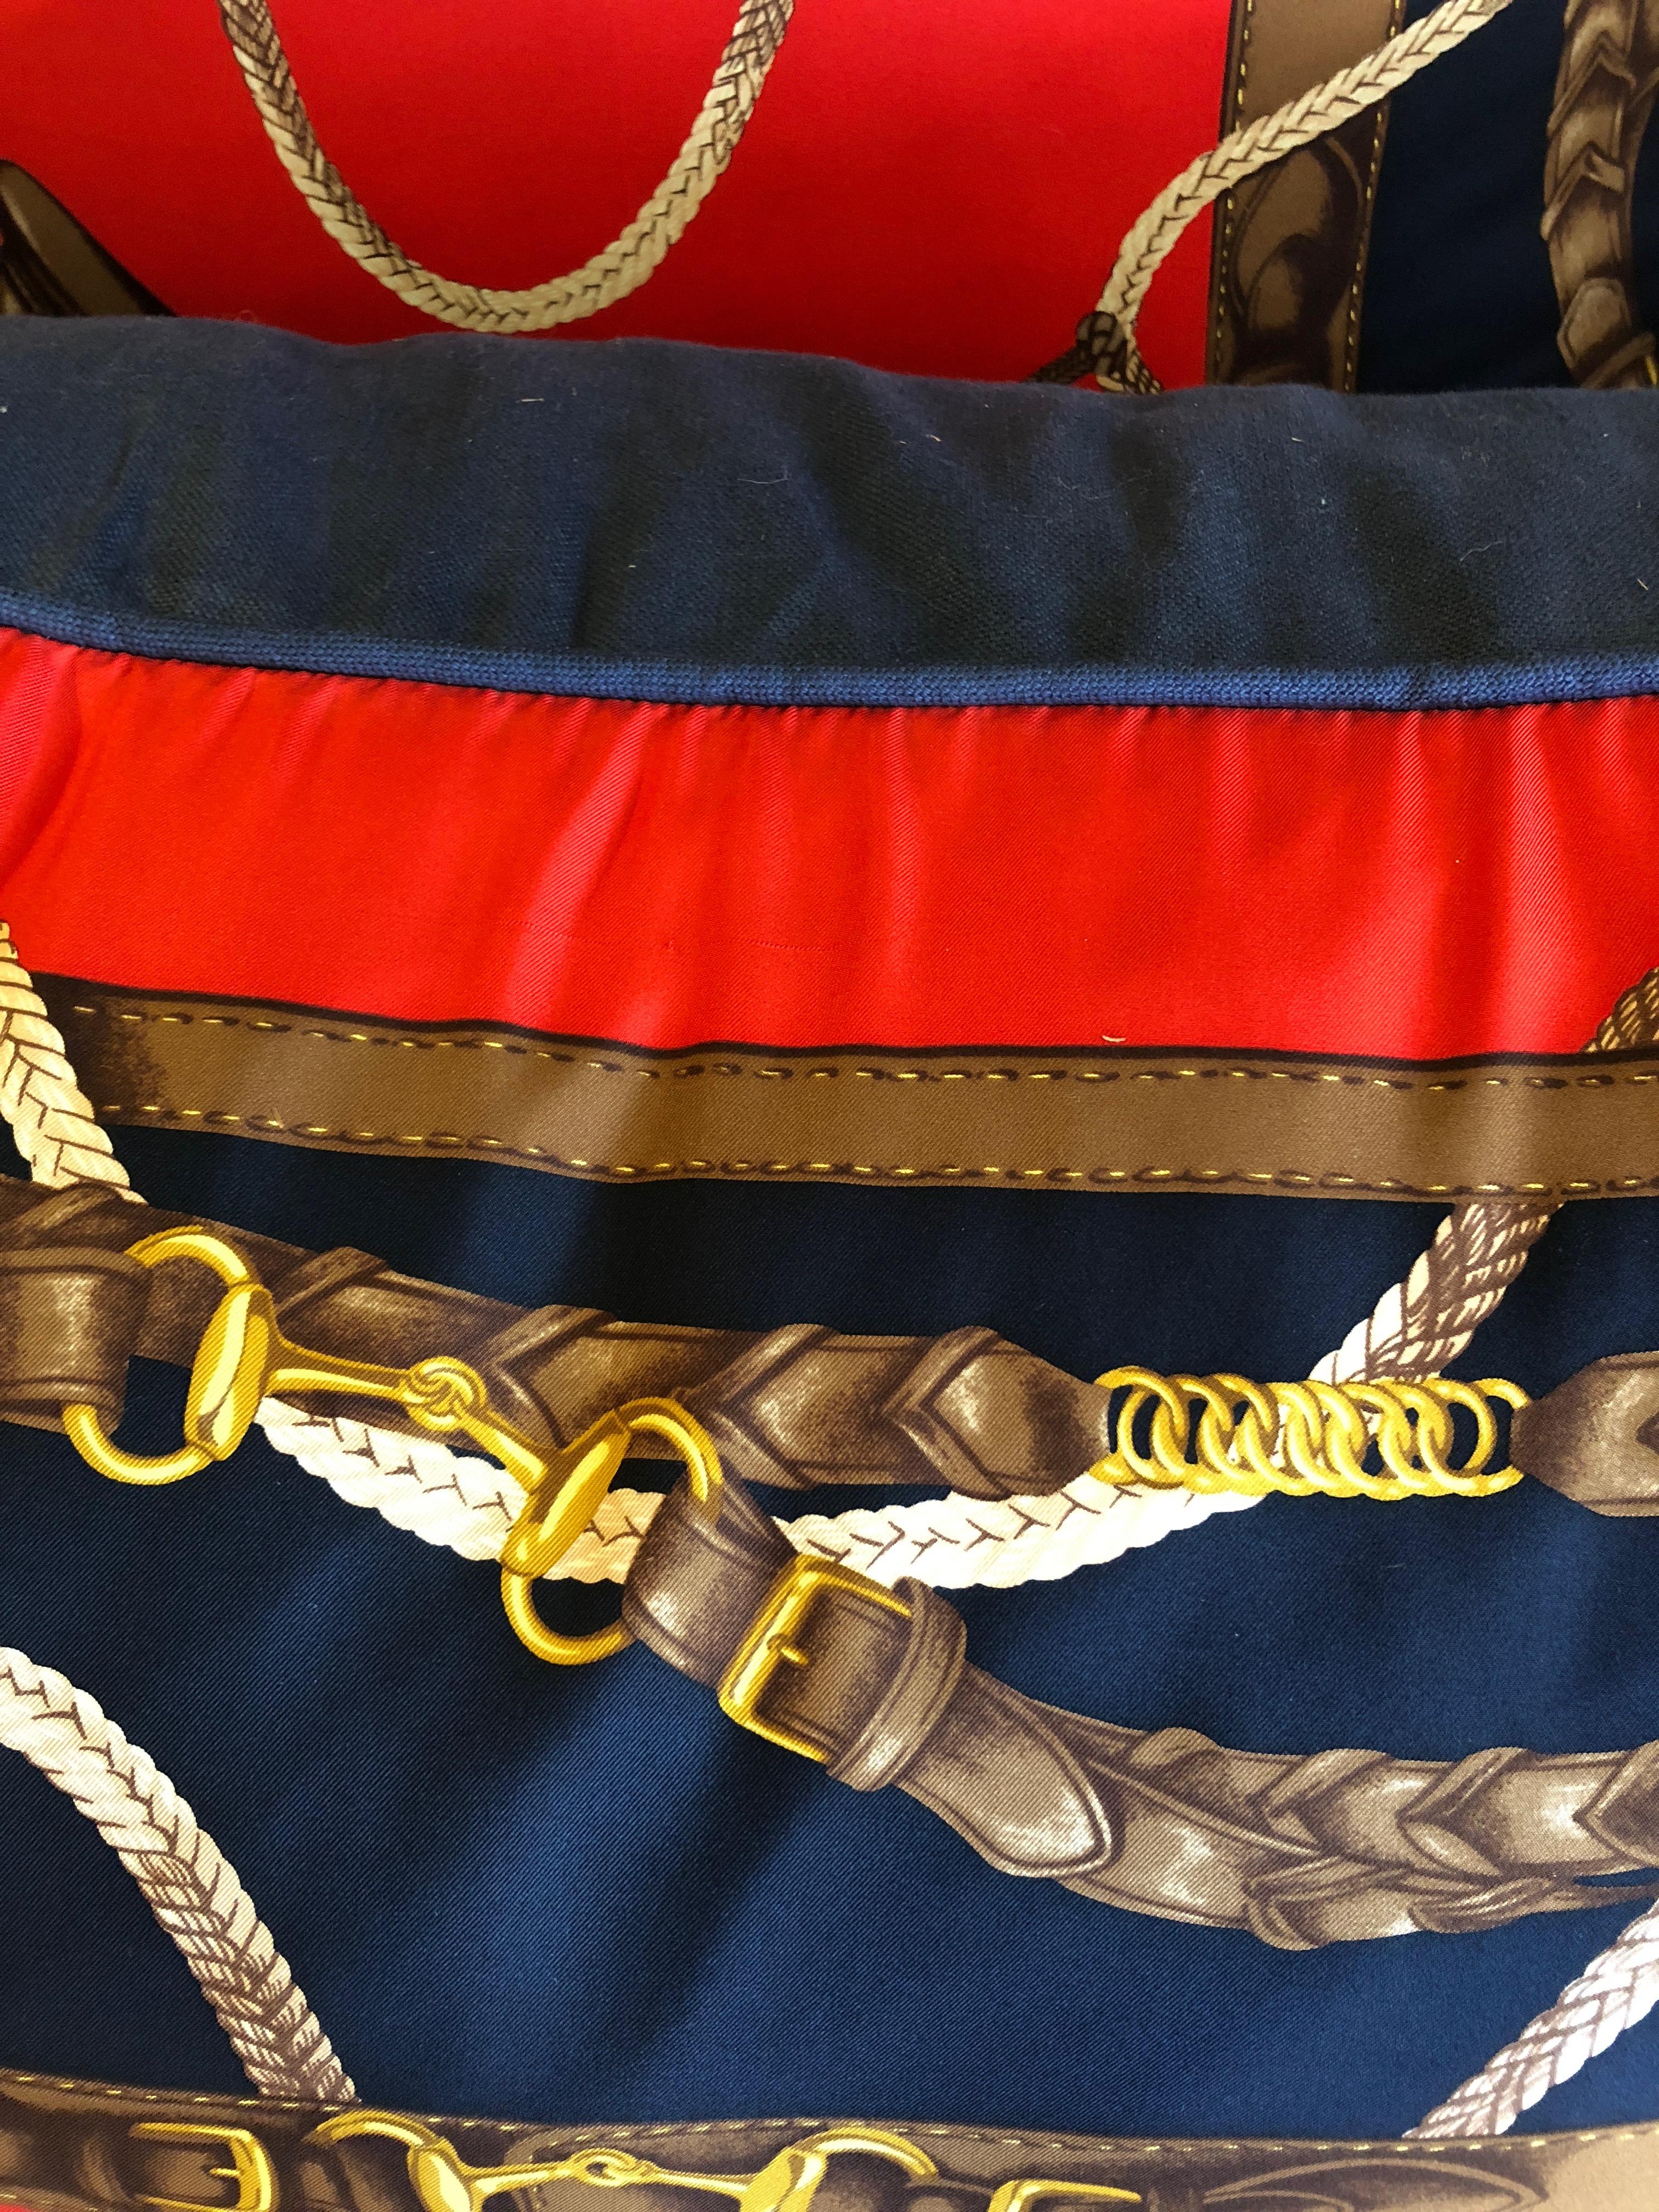 Cotton Sumptuous Set of Ralph Lauren Pillows in Red and Navy Blue